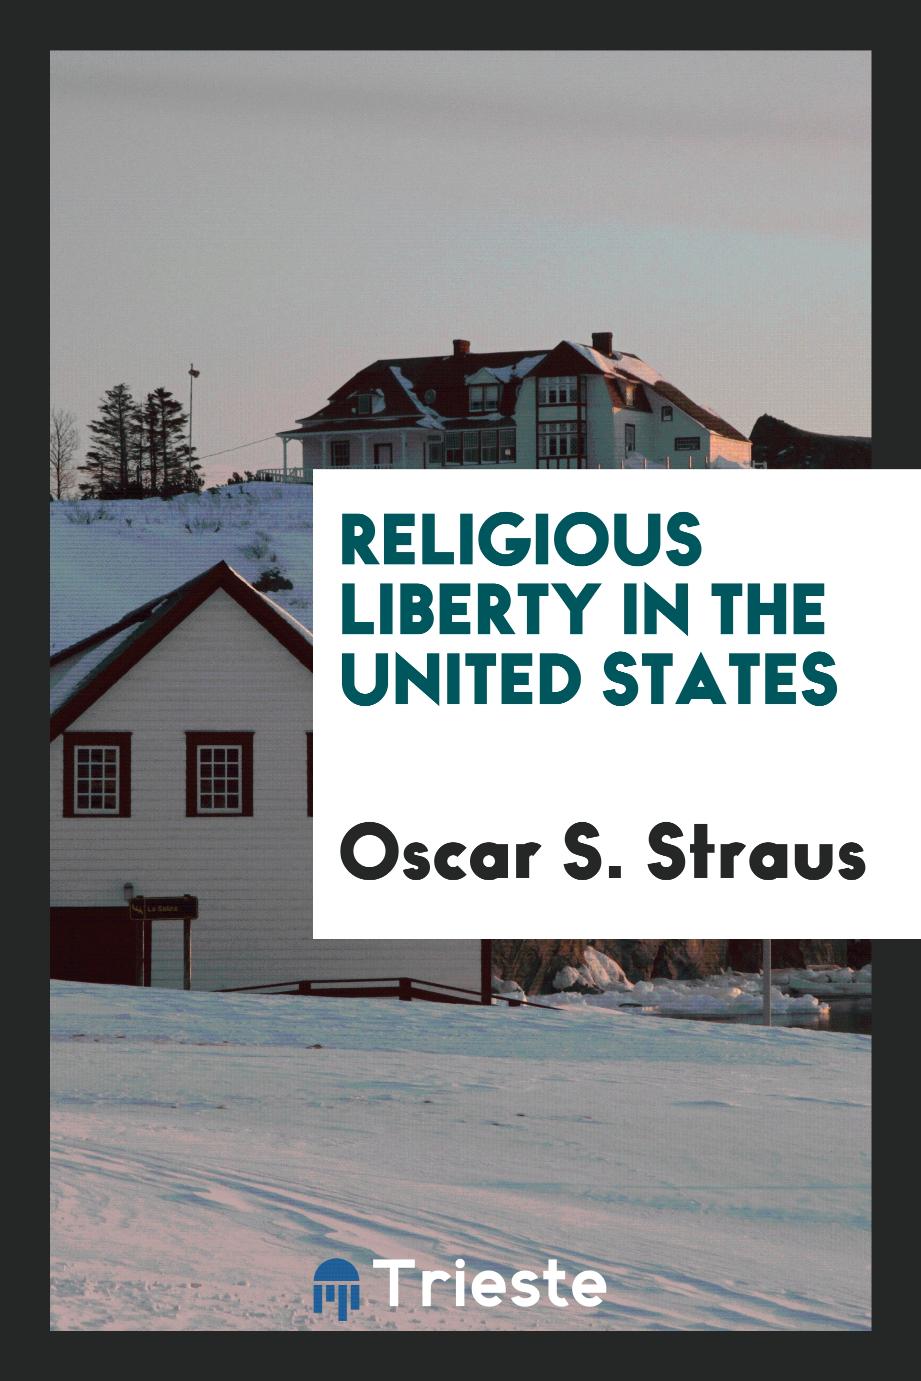 Religious liberty in the United States